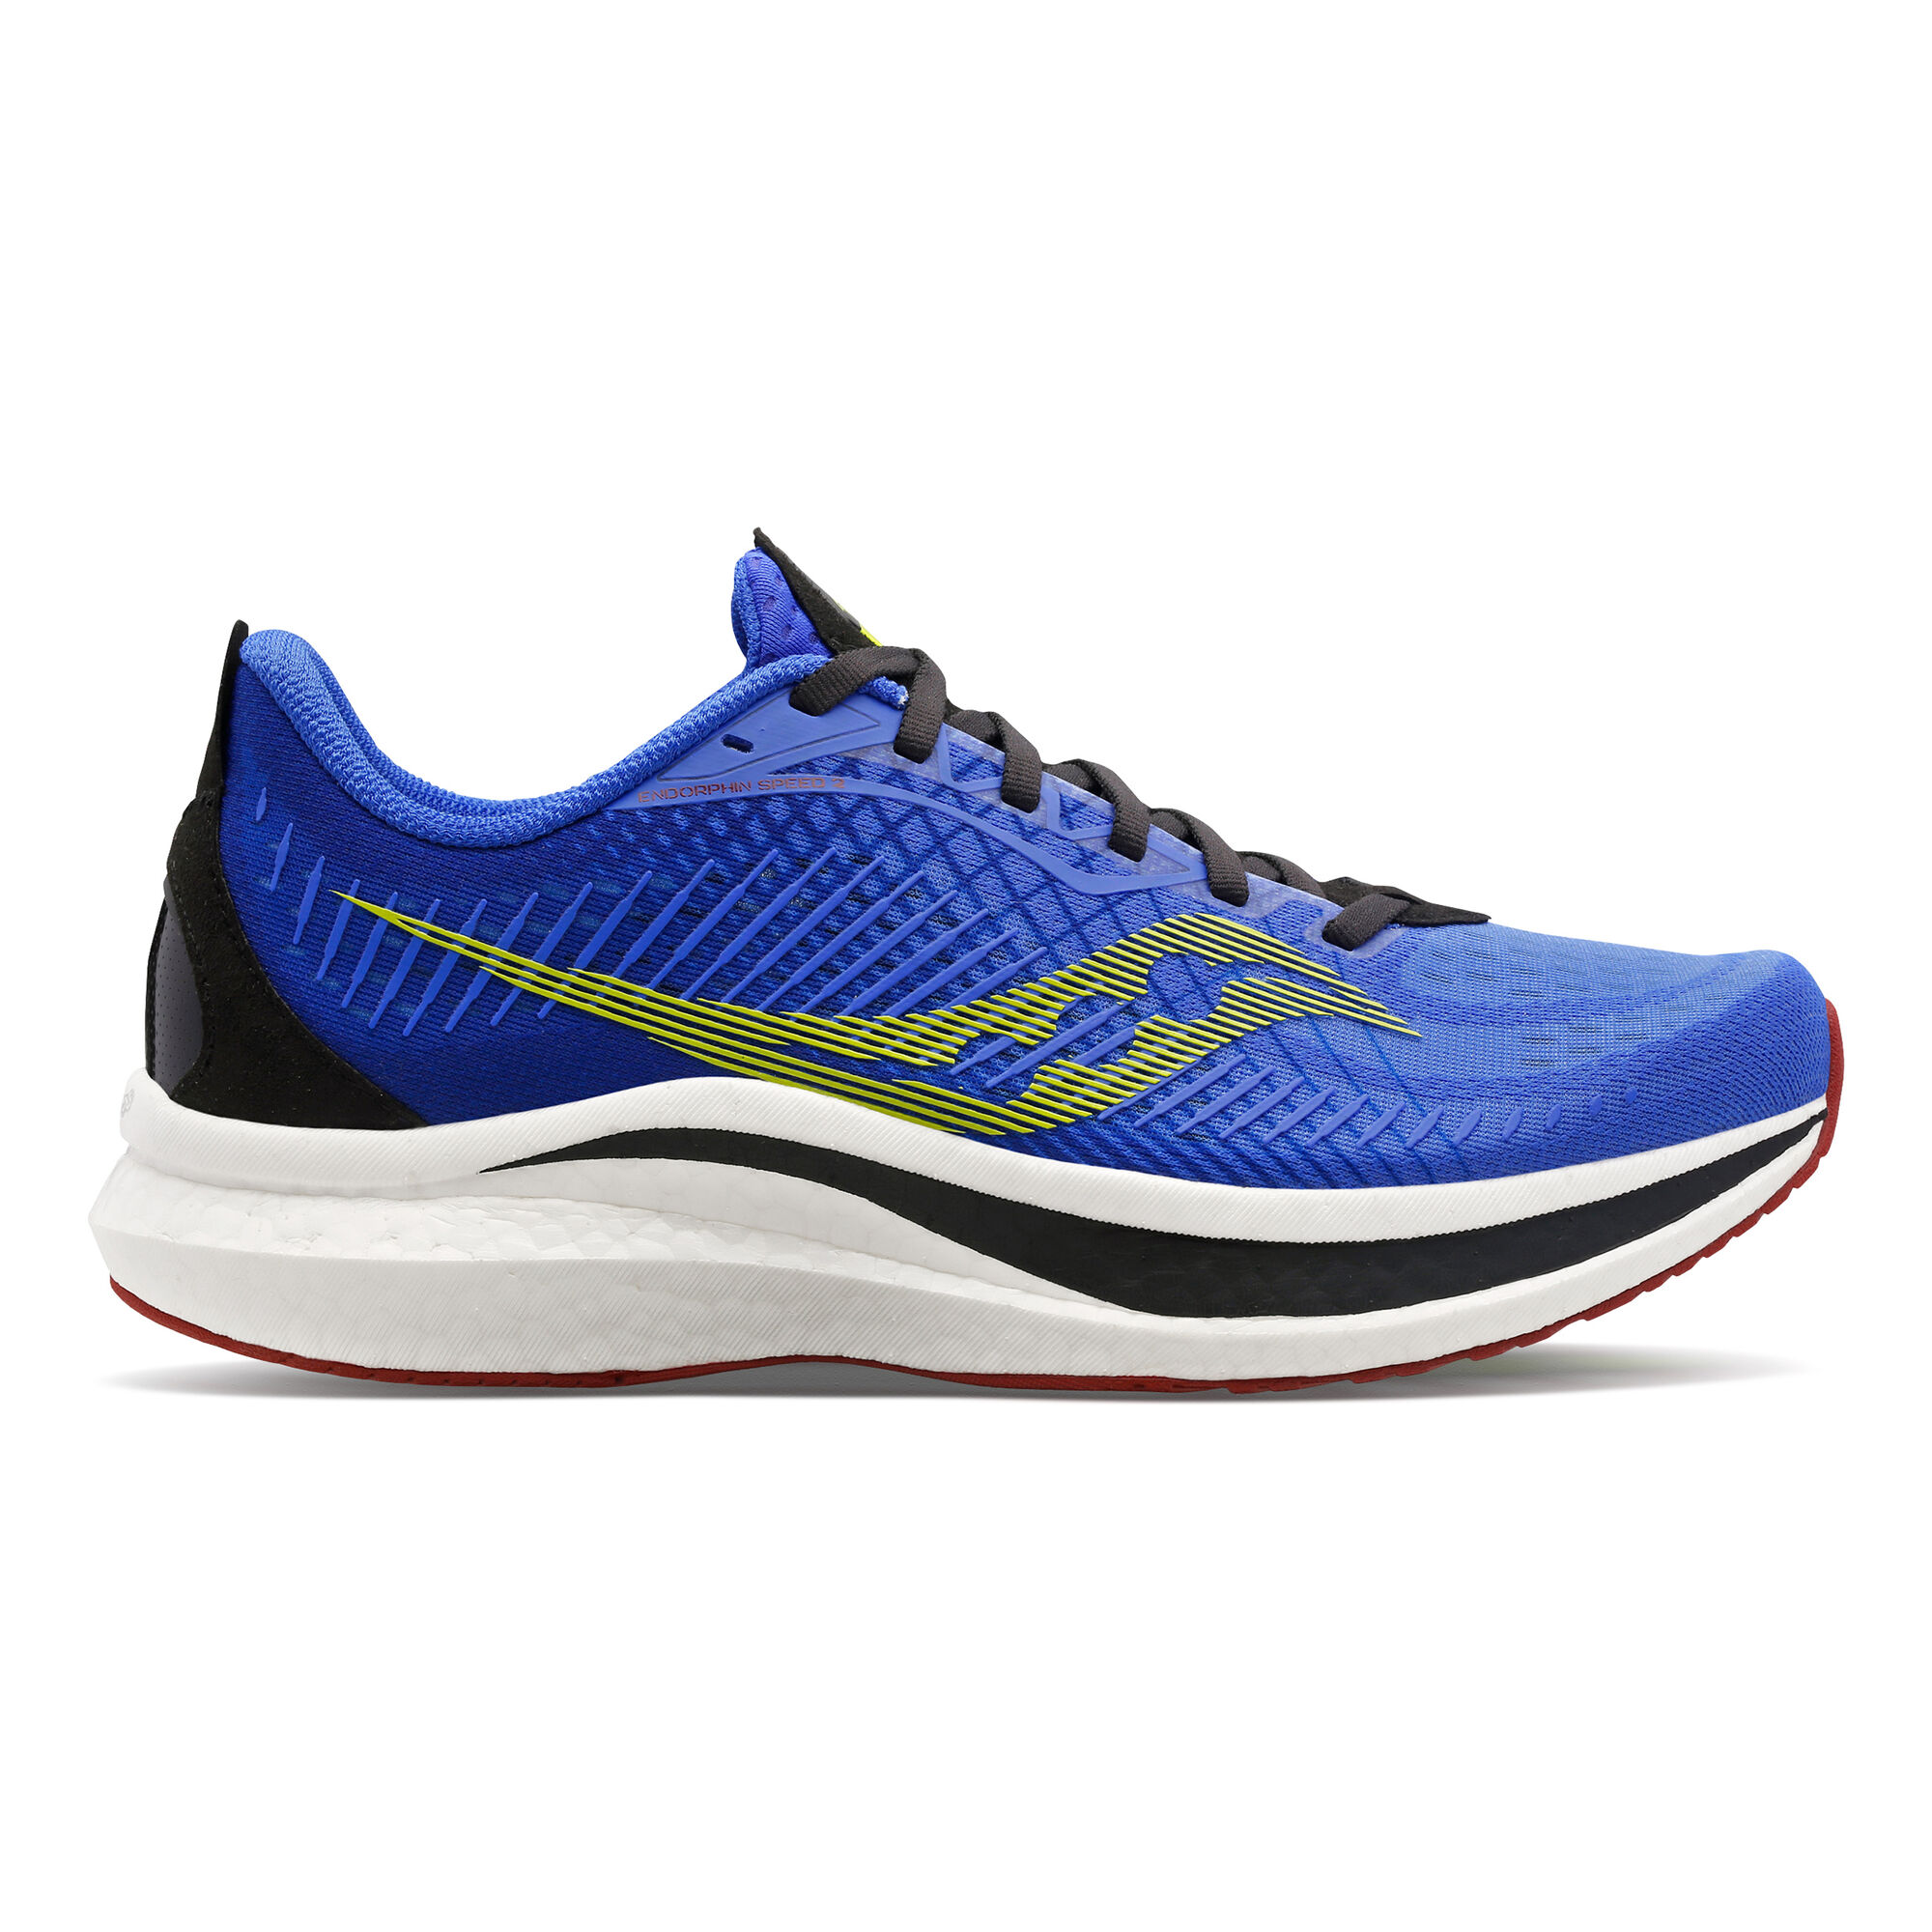 Buy Saucony Endorphin Speed 2 Competition Running Shoe Men Blue, Black ...